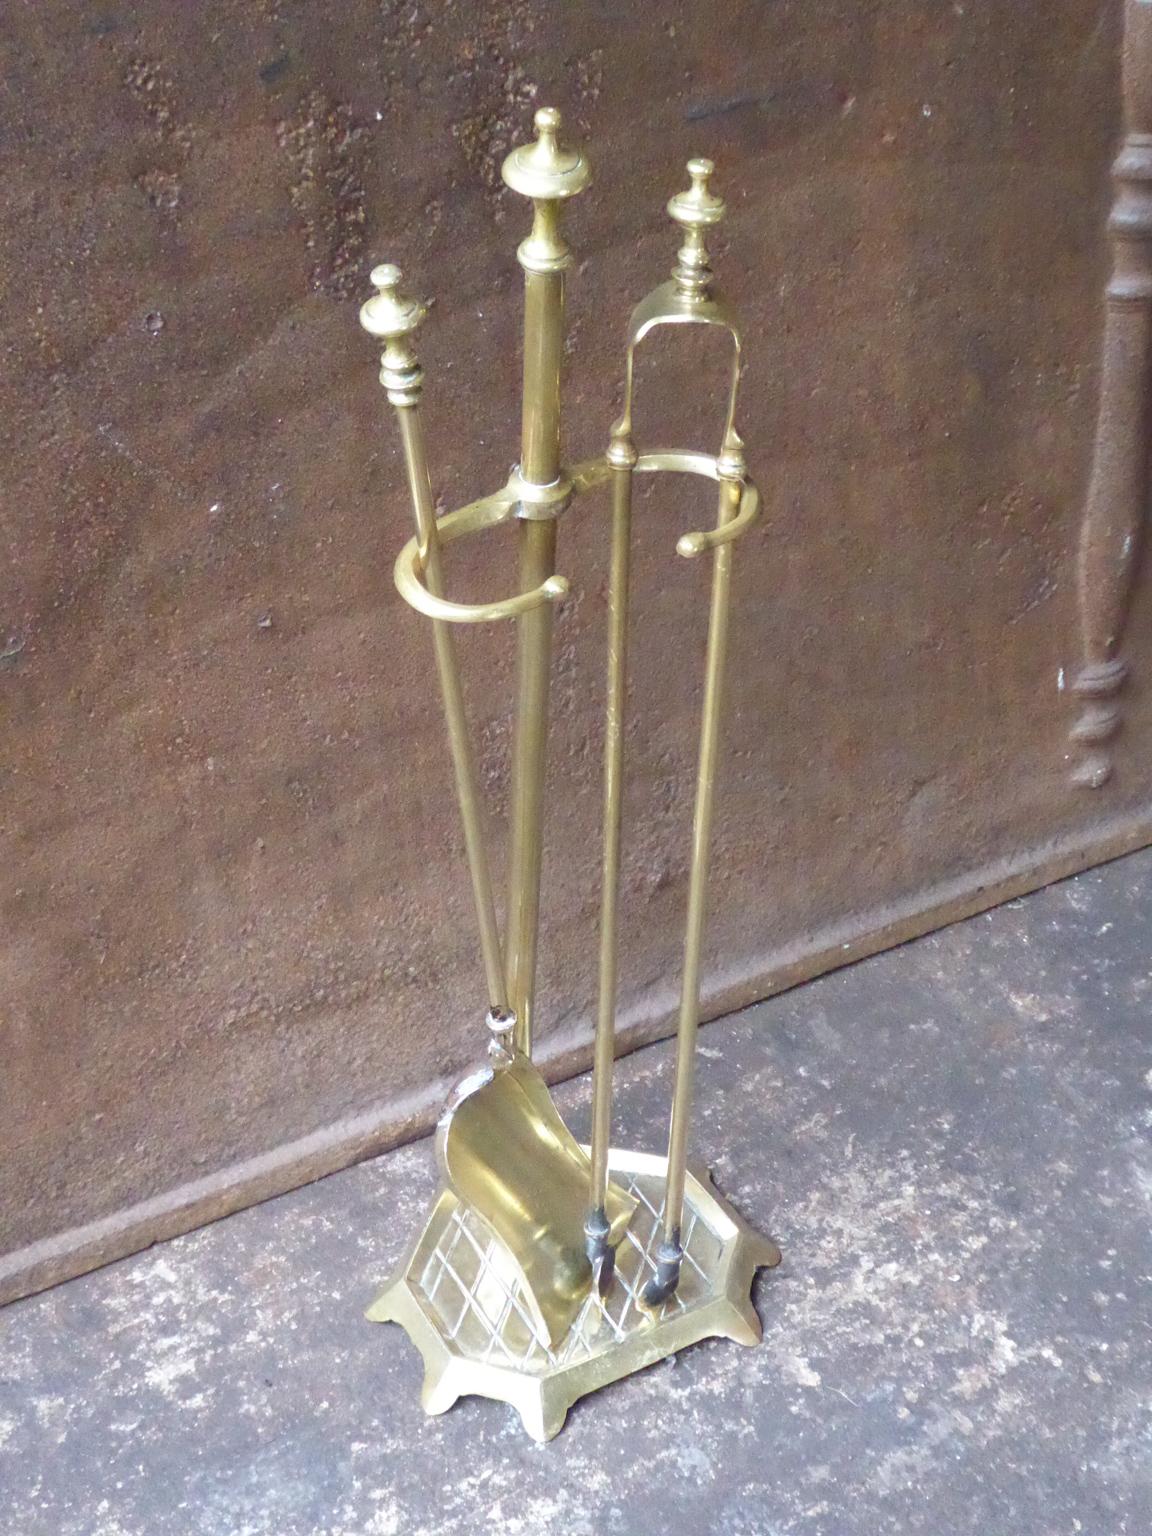 Polished Antique French Fireplace Tools or Fire Tools, 19th - early 20th Century For Sale